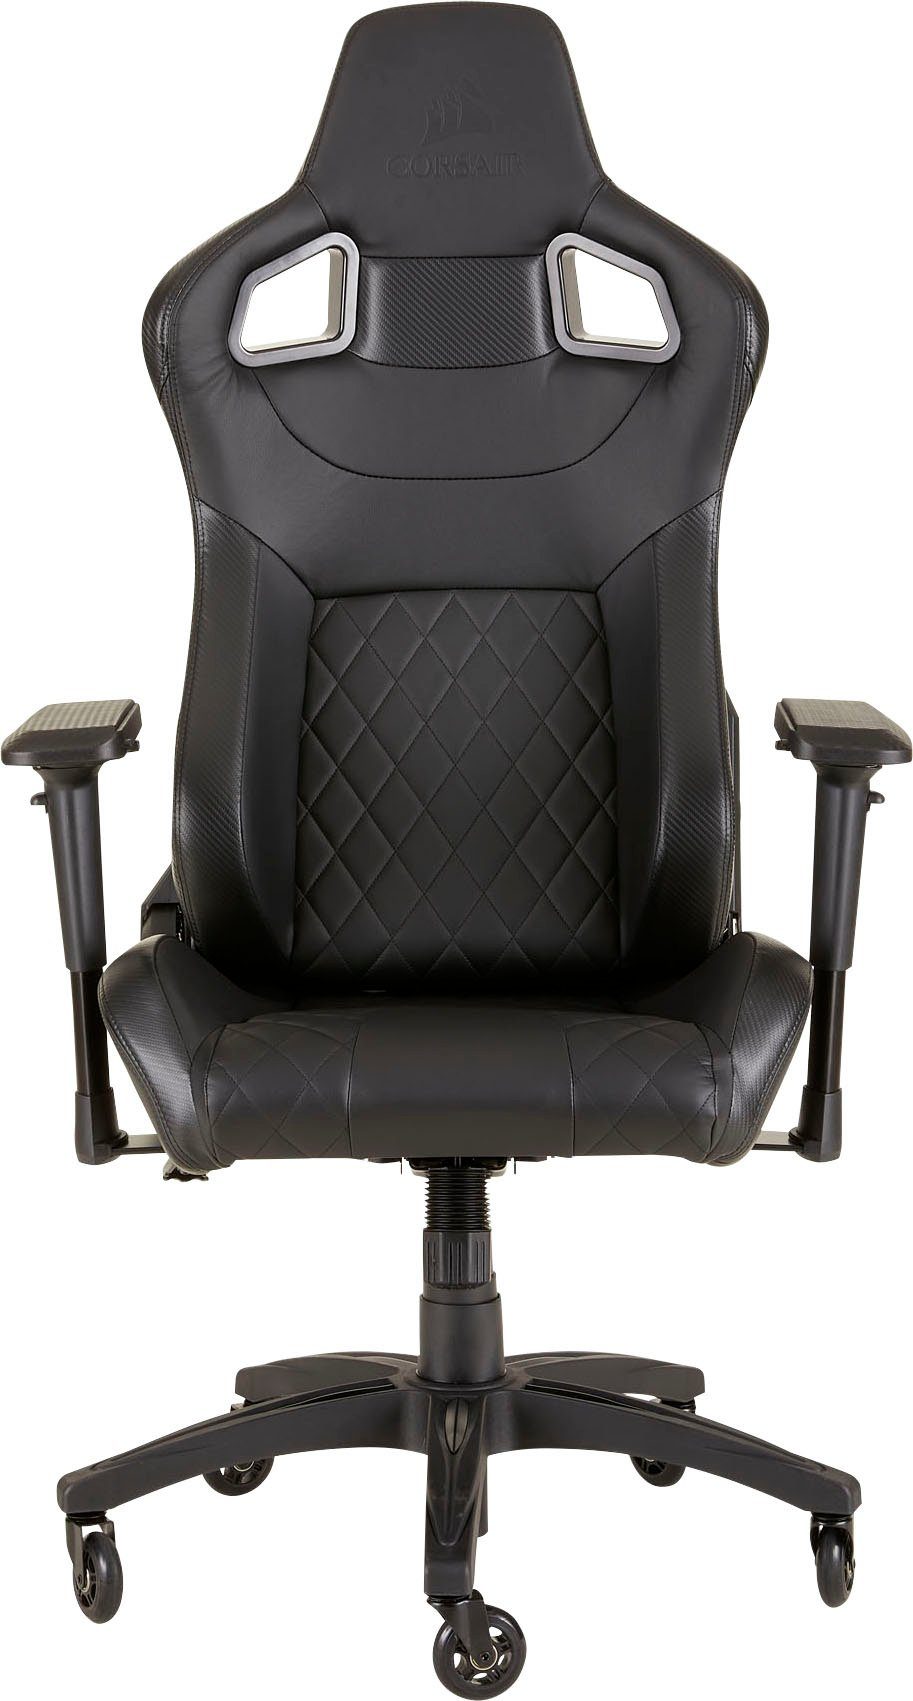 Corsair Gaming-Stuhl »T1 Race 2018 T1 Race 2018 Gaming Chair« online kaufen  | OTTO